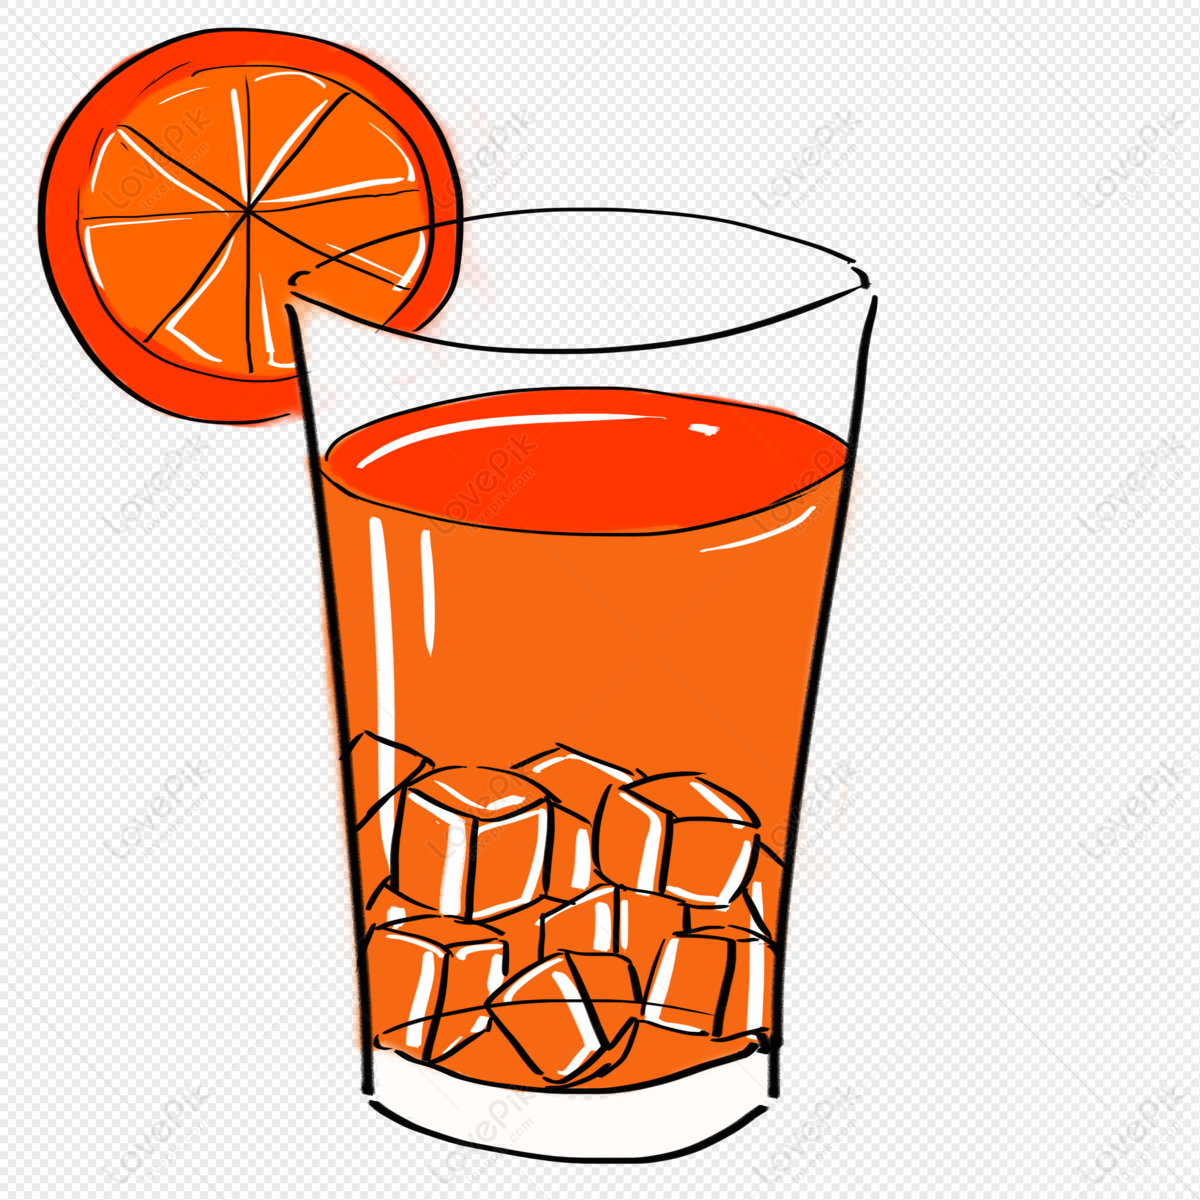 Hand Painted Cartoon Summer Ice Drink Orange Juice Free Material PNG White  Transparent And Clipart Image For Free Download - Lovepik | 401227332